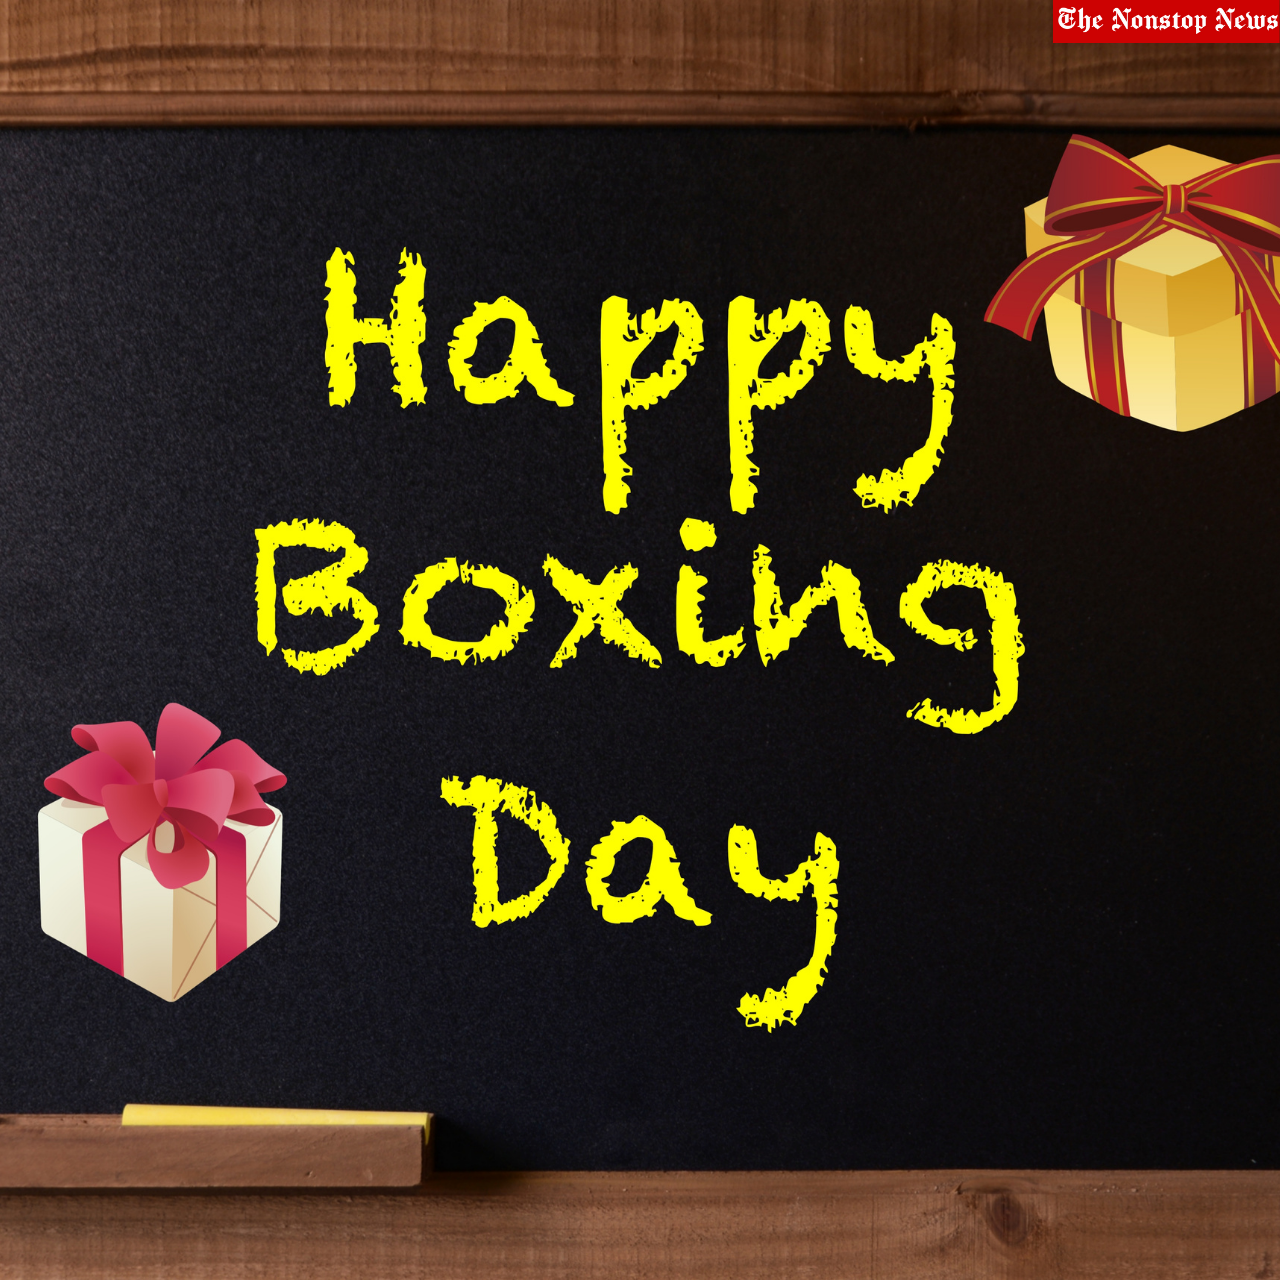 Boxing Day 2021 Quotes, Wishes, Images, Messages, Greetings, Slogans to share